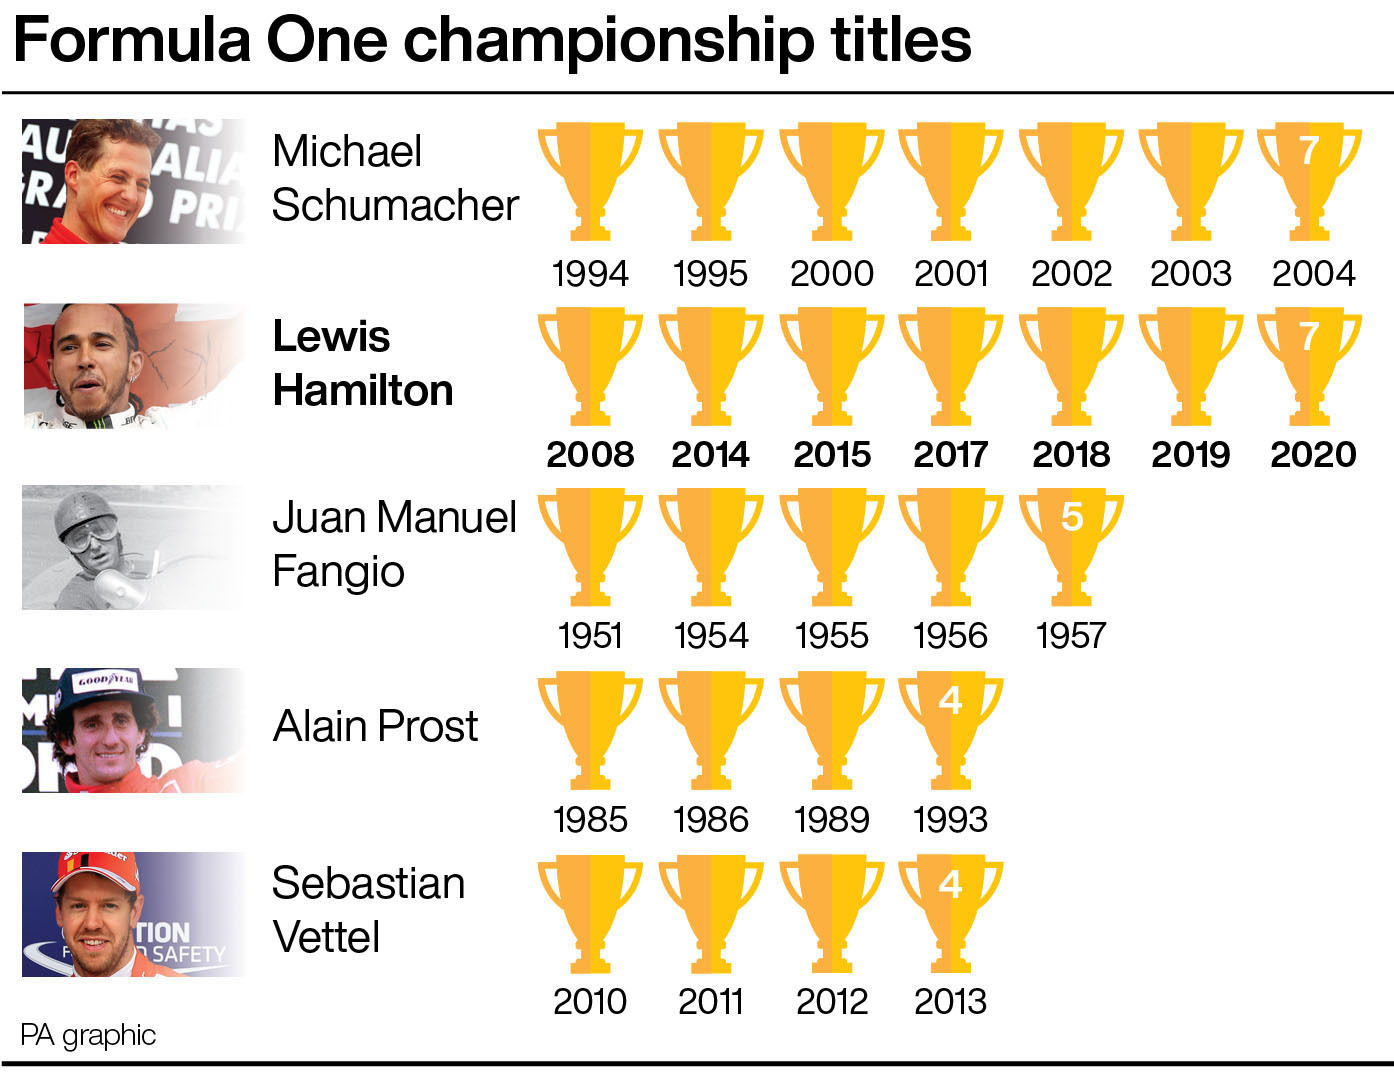 A graphic of F1 world titles